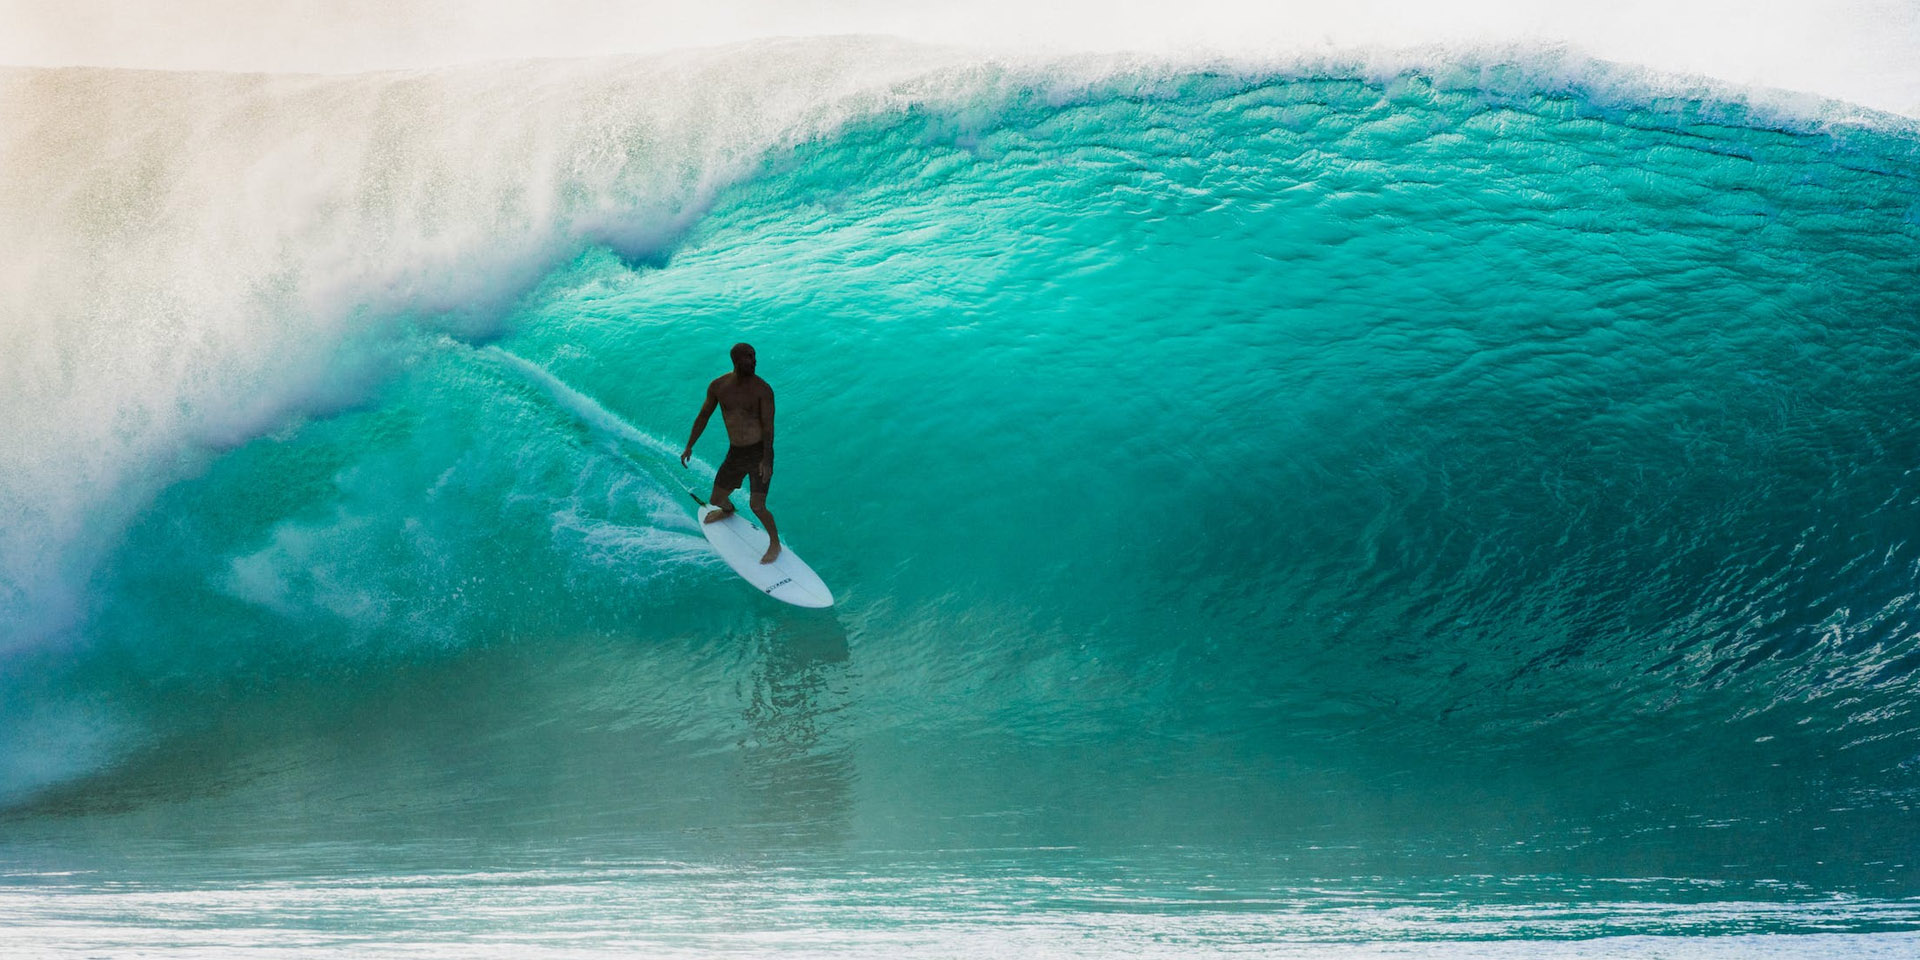 Is Surfing Bad for Mental Health?